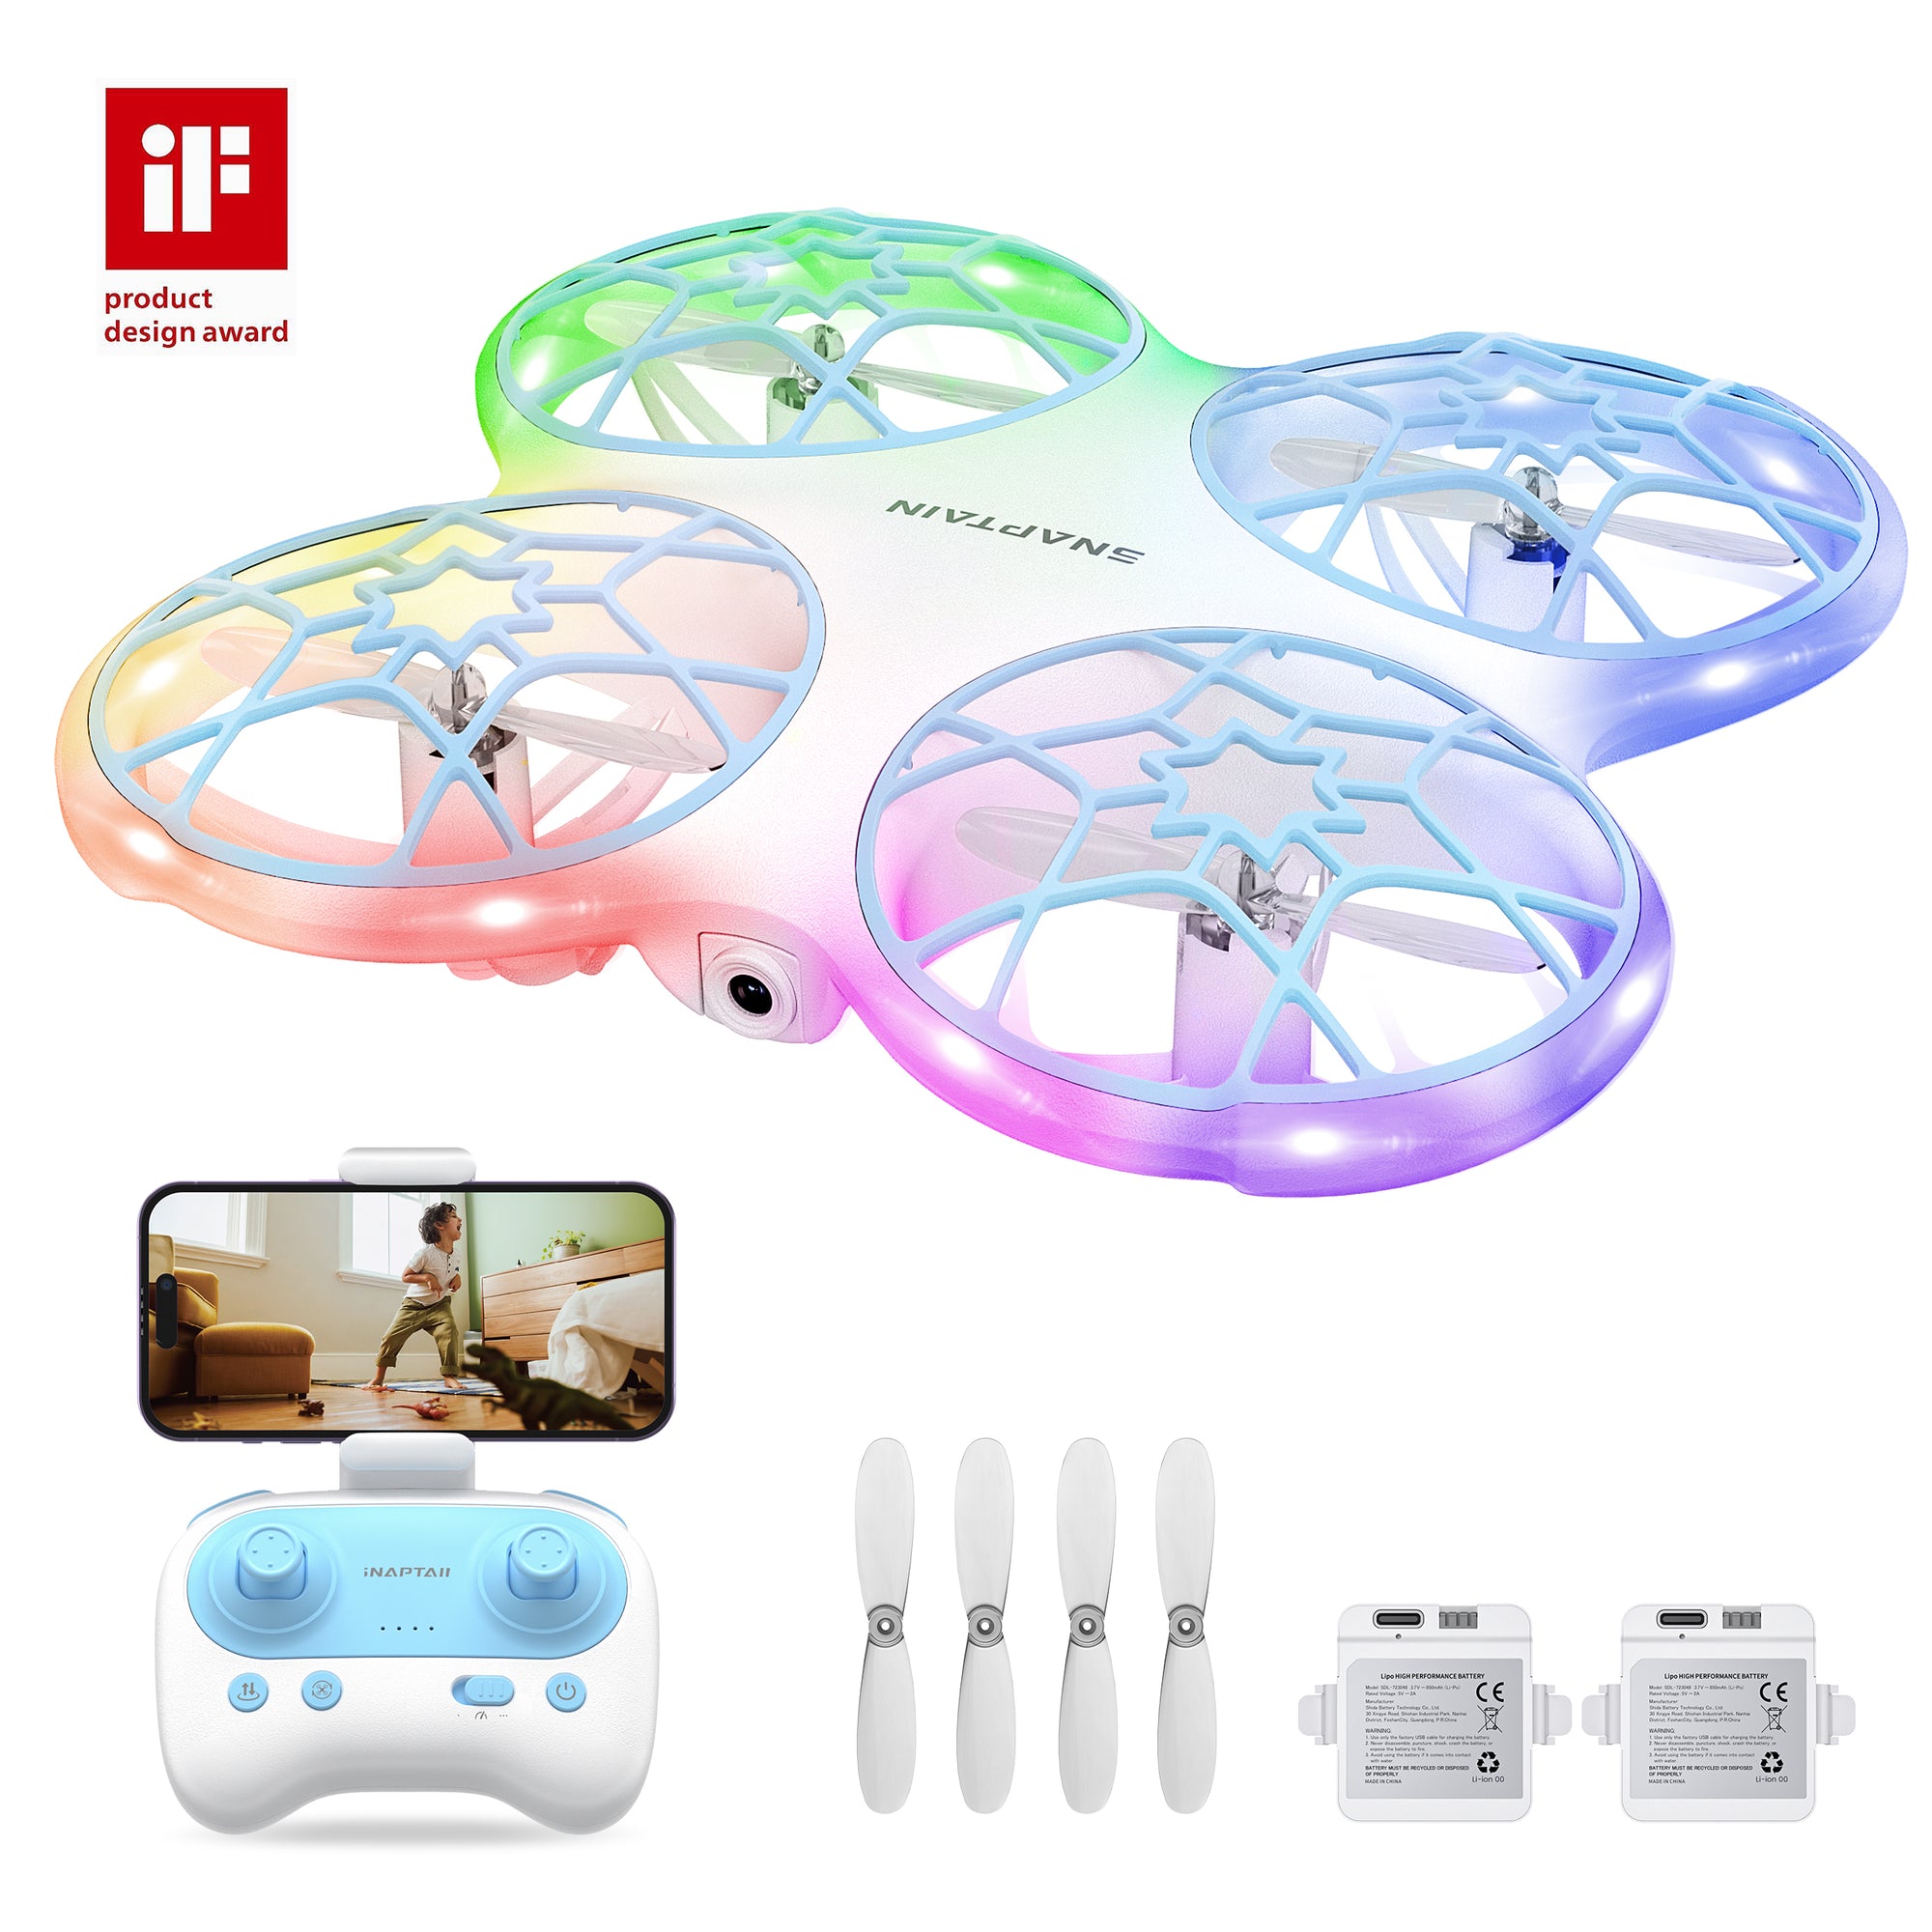 Snaptain K30 Mini Drone with Camera for Kids 720P, HD FPV RC Drones for Kids and Adults with Cool LED Light,Altitude Hold, Headless Mode,3D Flips, Speed Adjustment and 2 Batteries